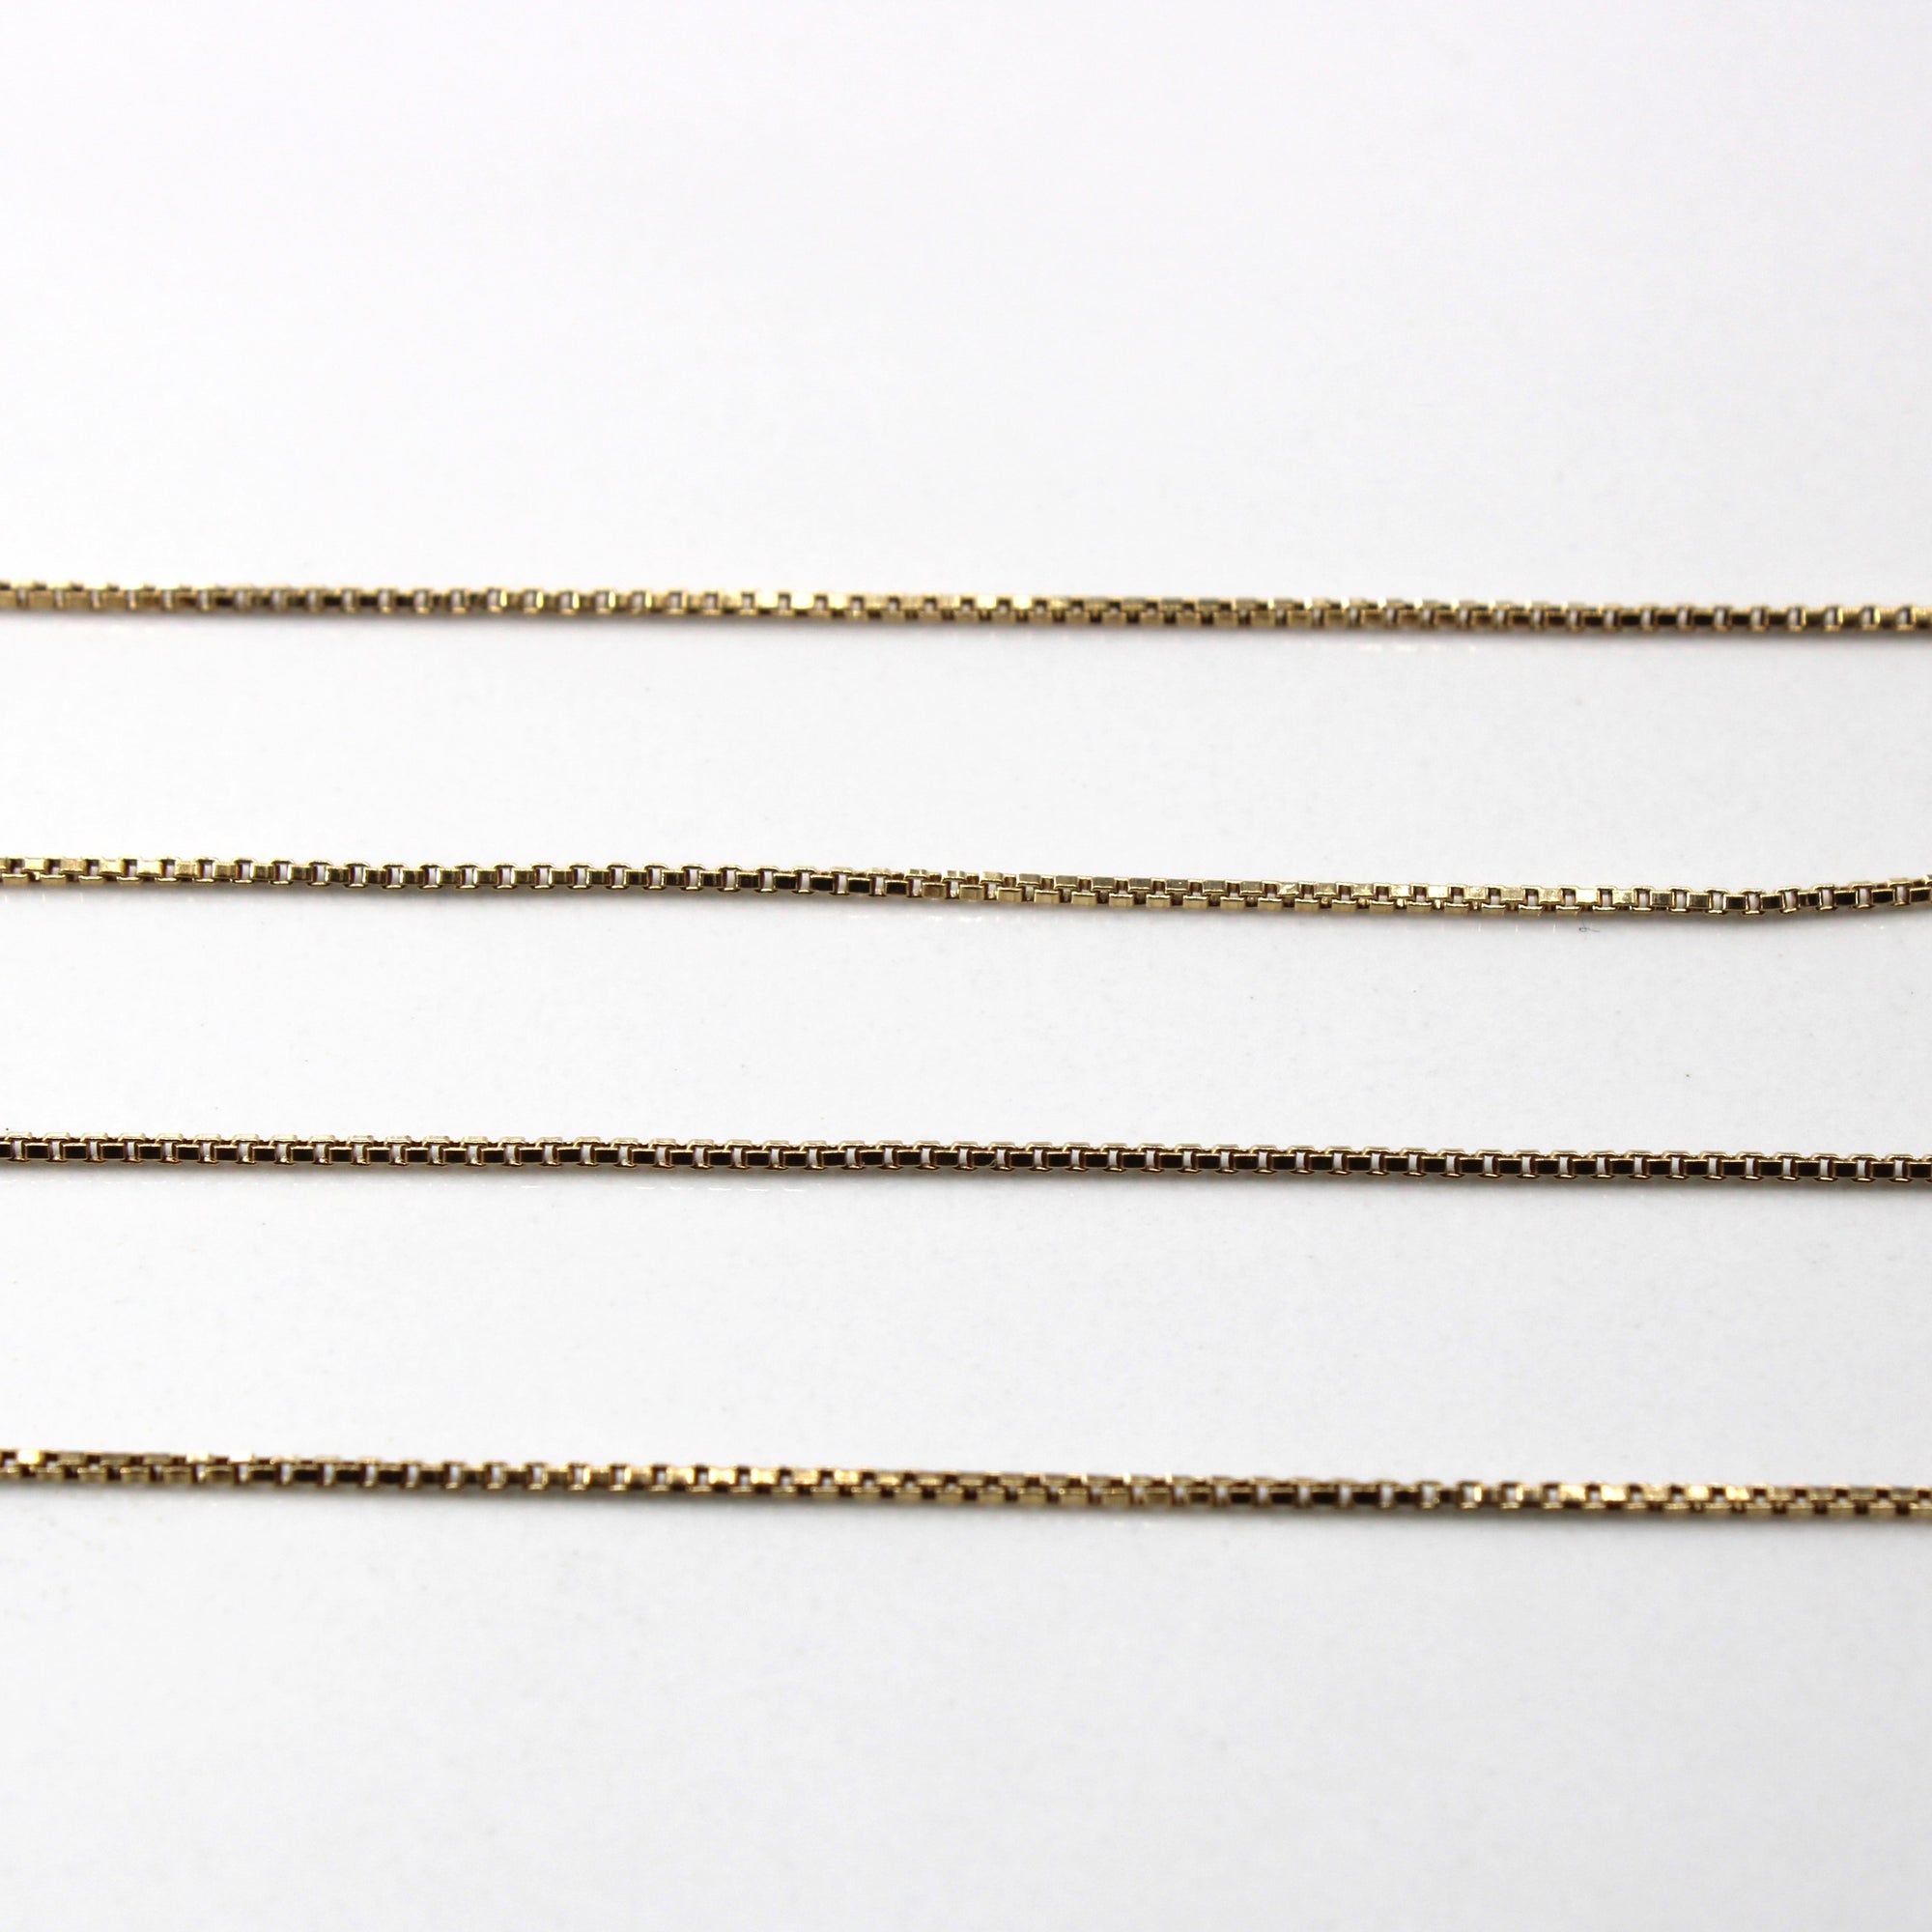 10k Yellow Gold Pendant Necklace | 32